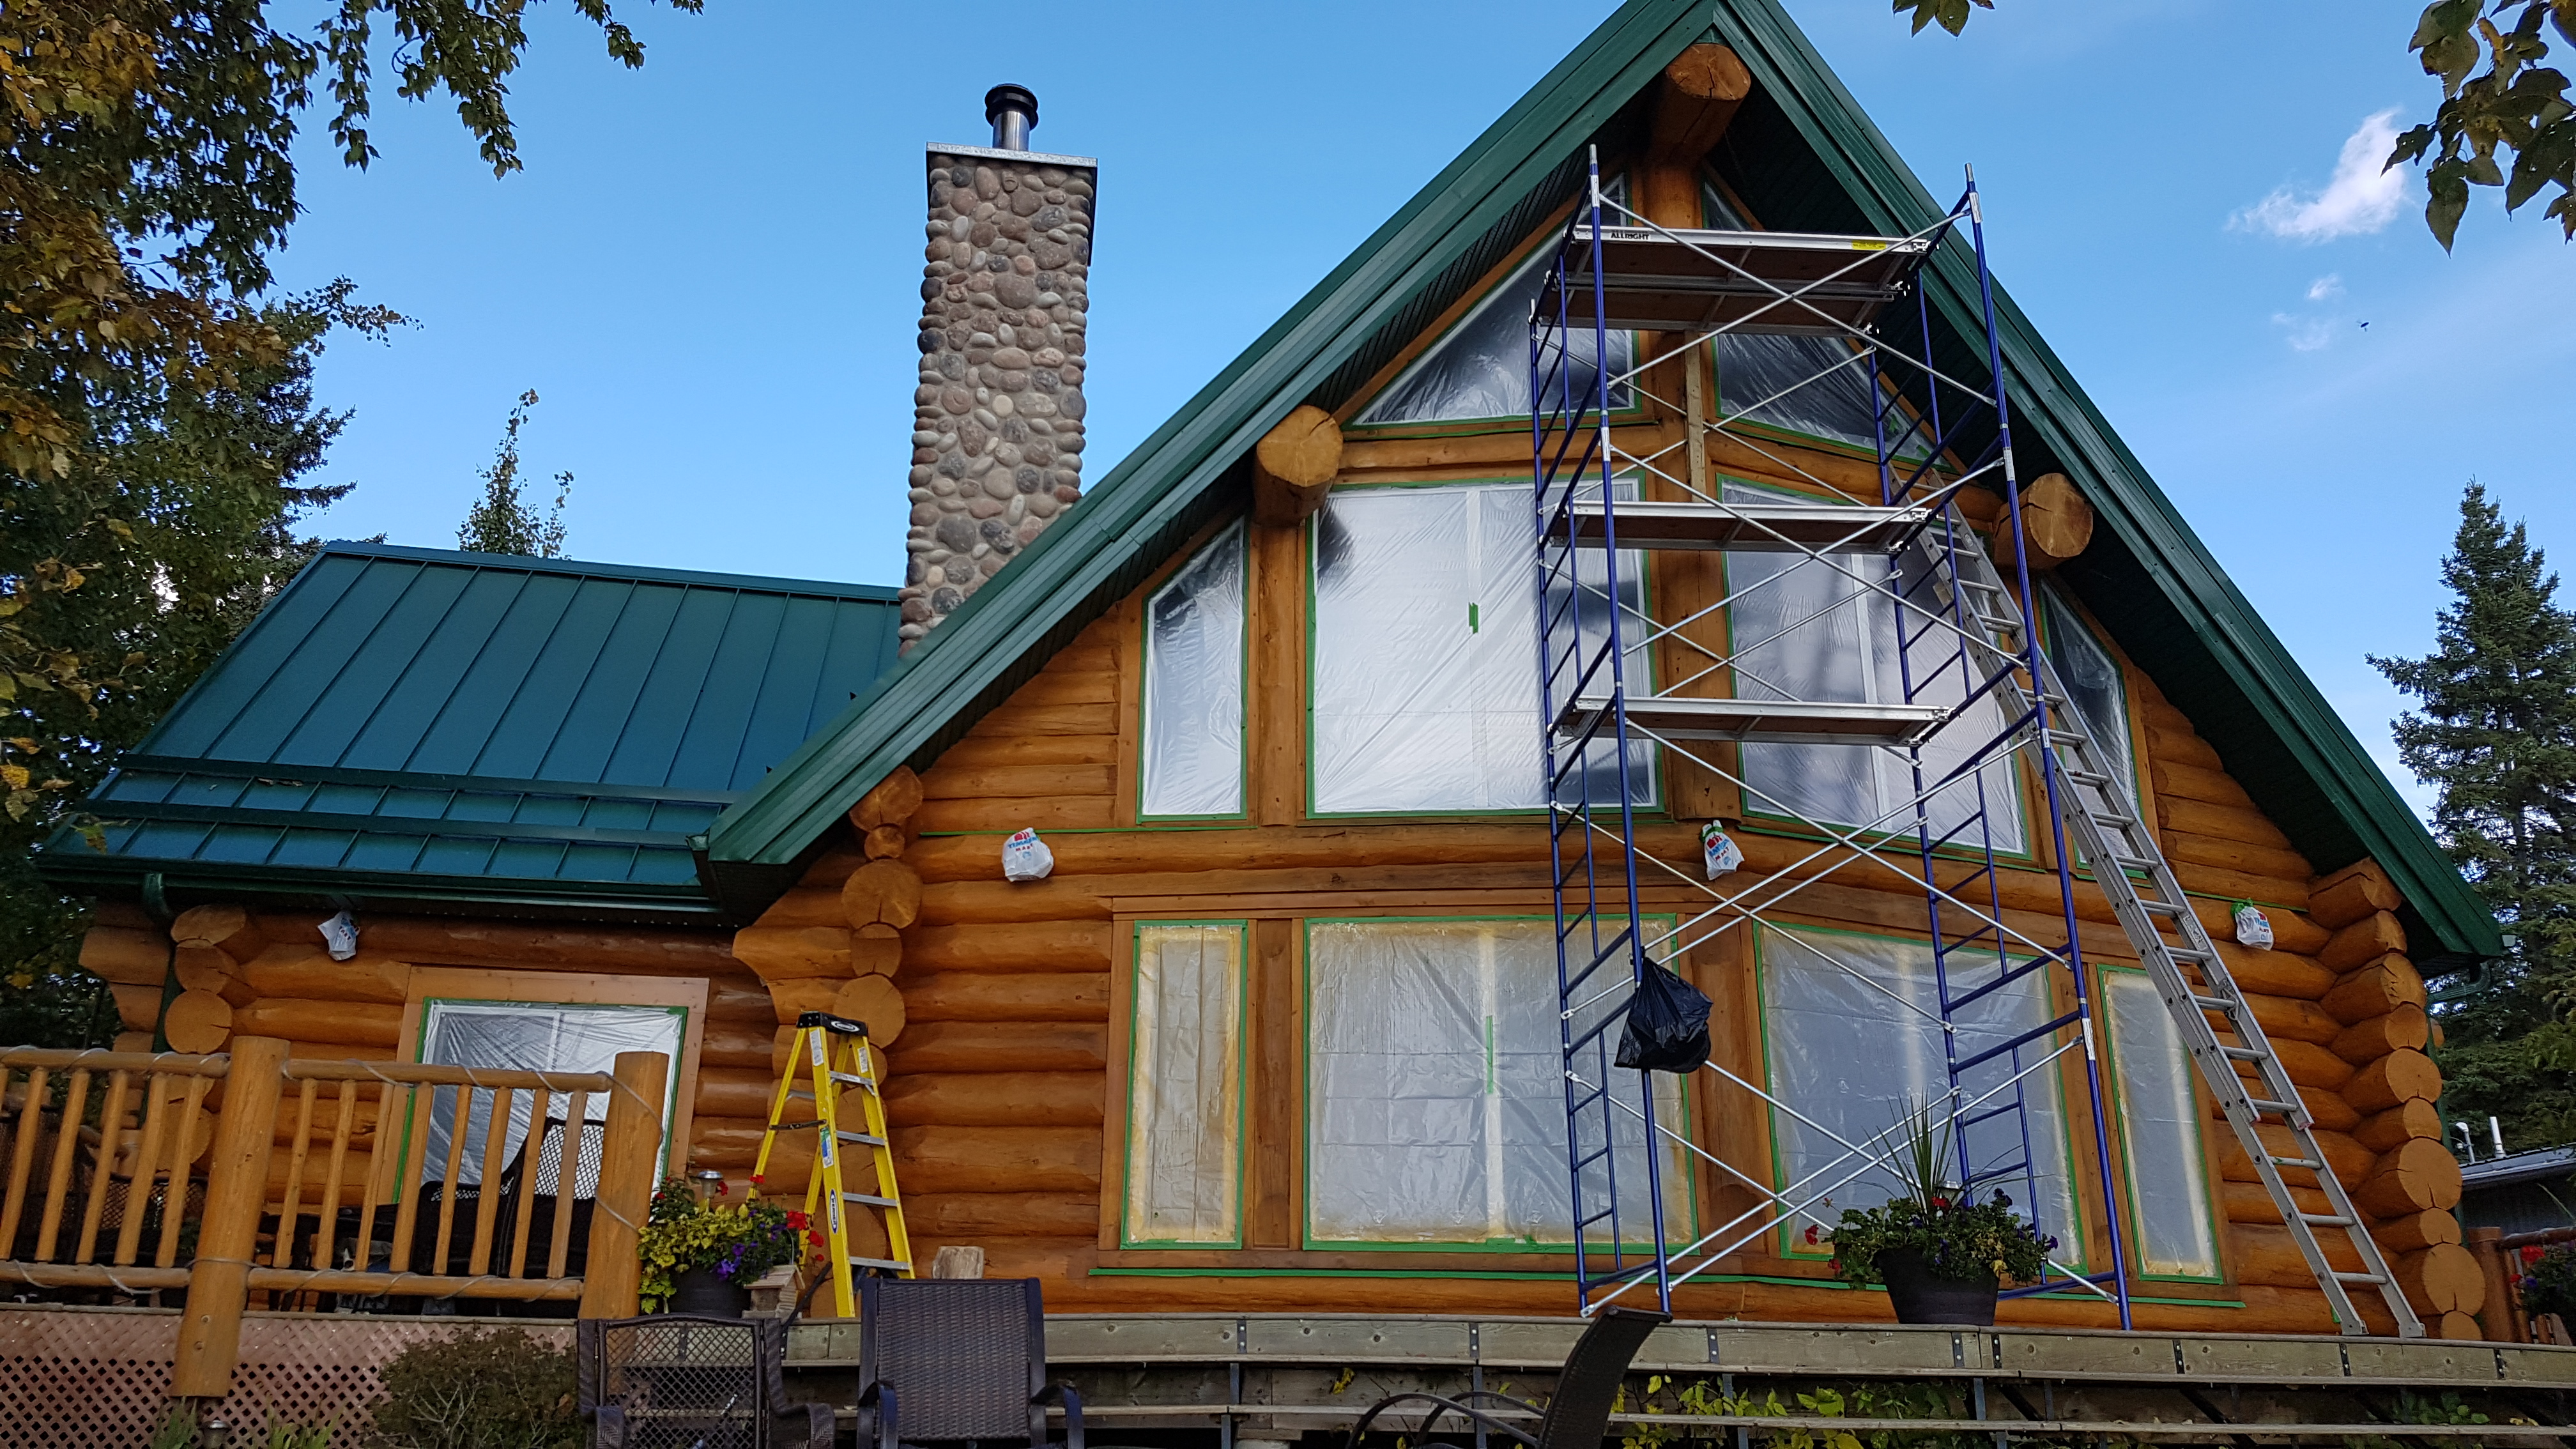 Scaffolding outside of the log home